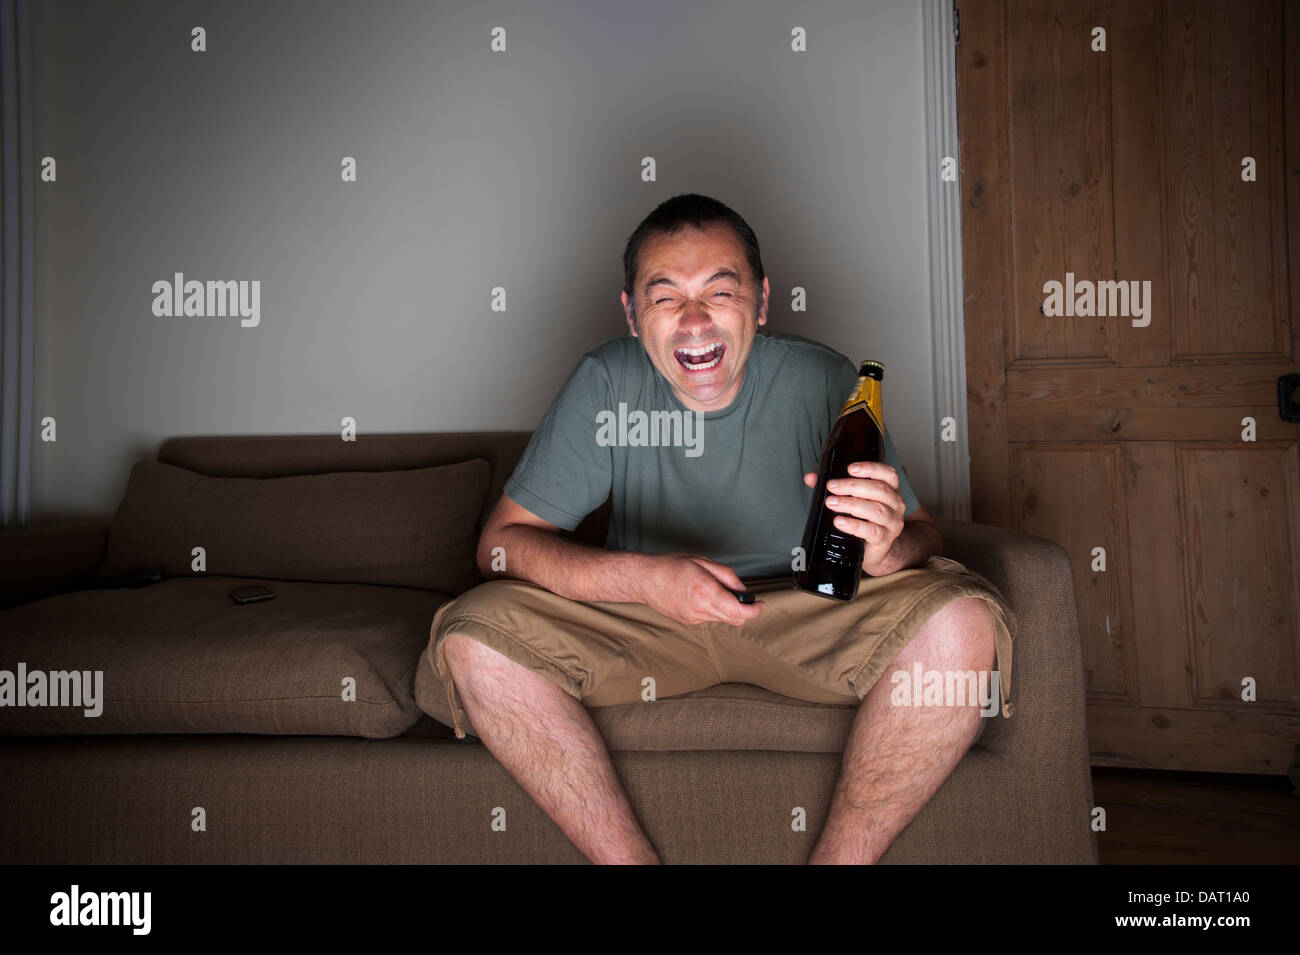 man drinking beer and laughing at the television or tv Stock Photo